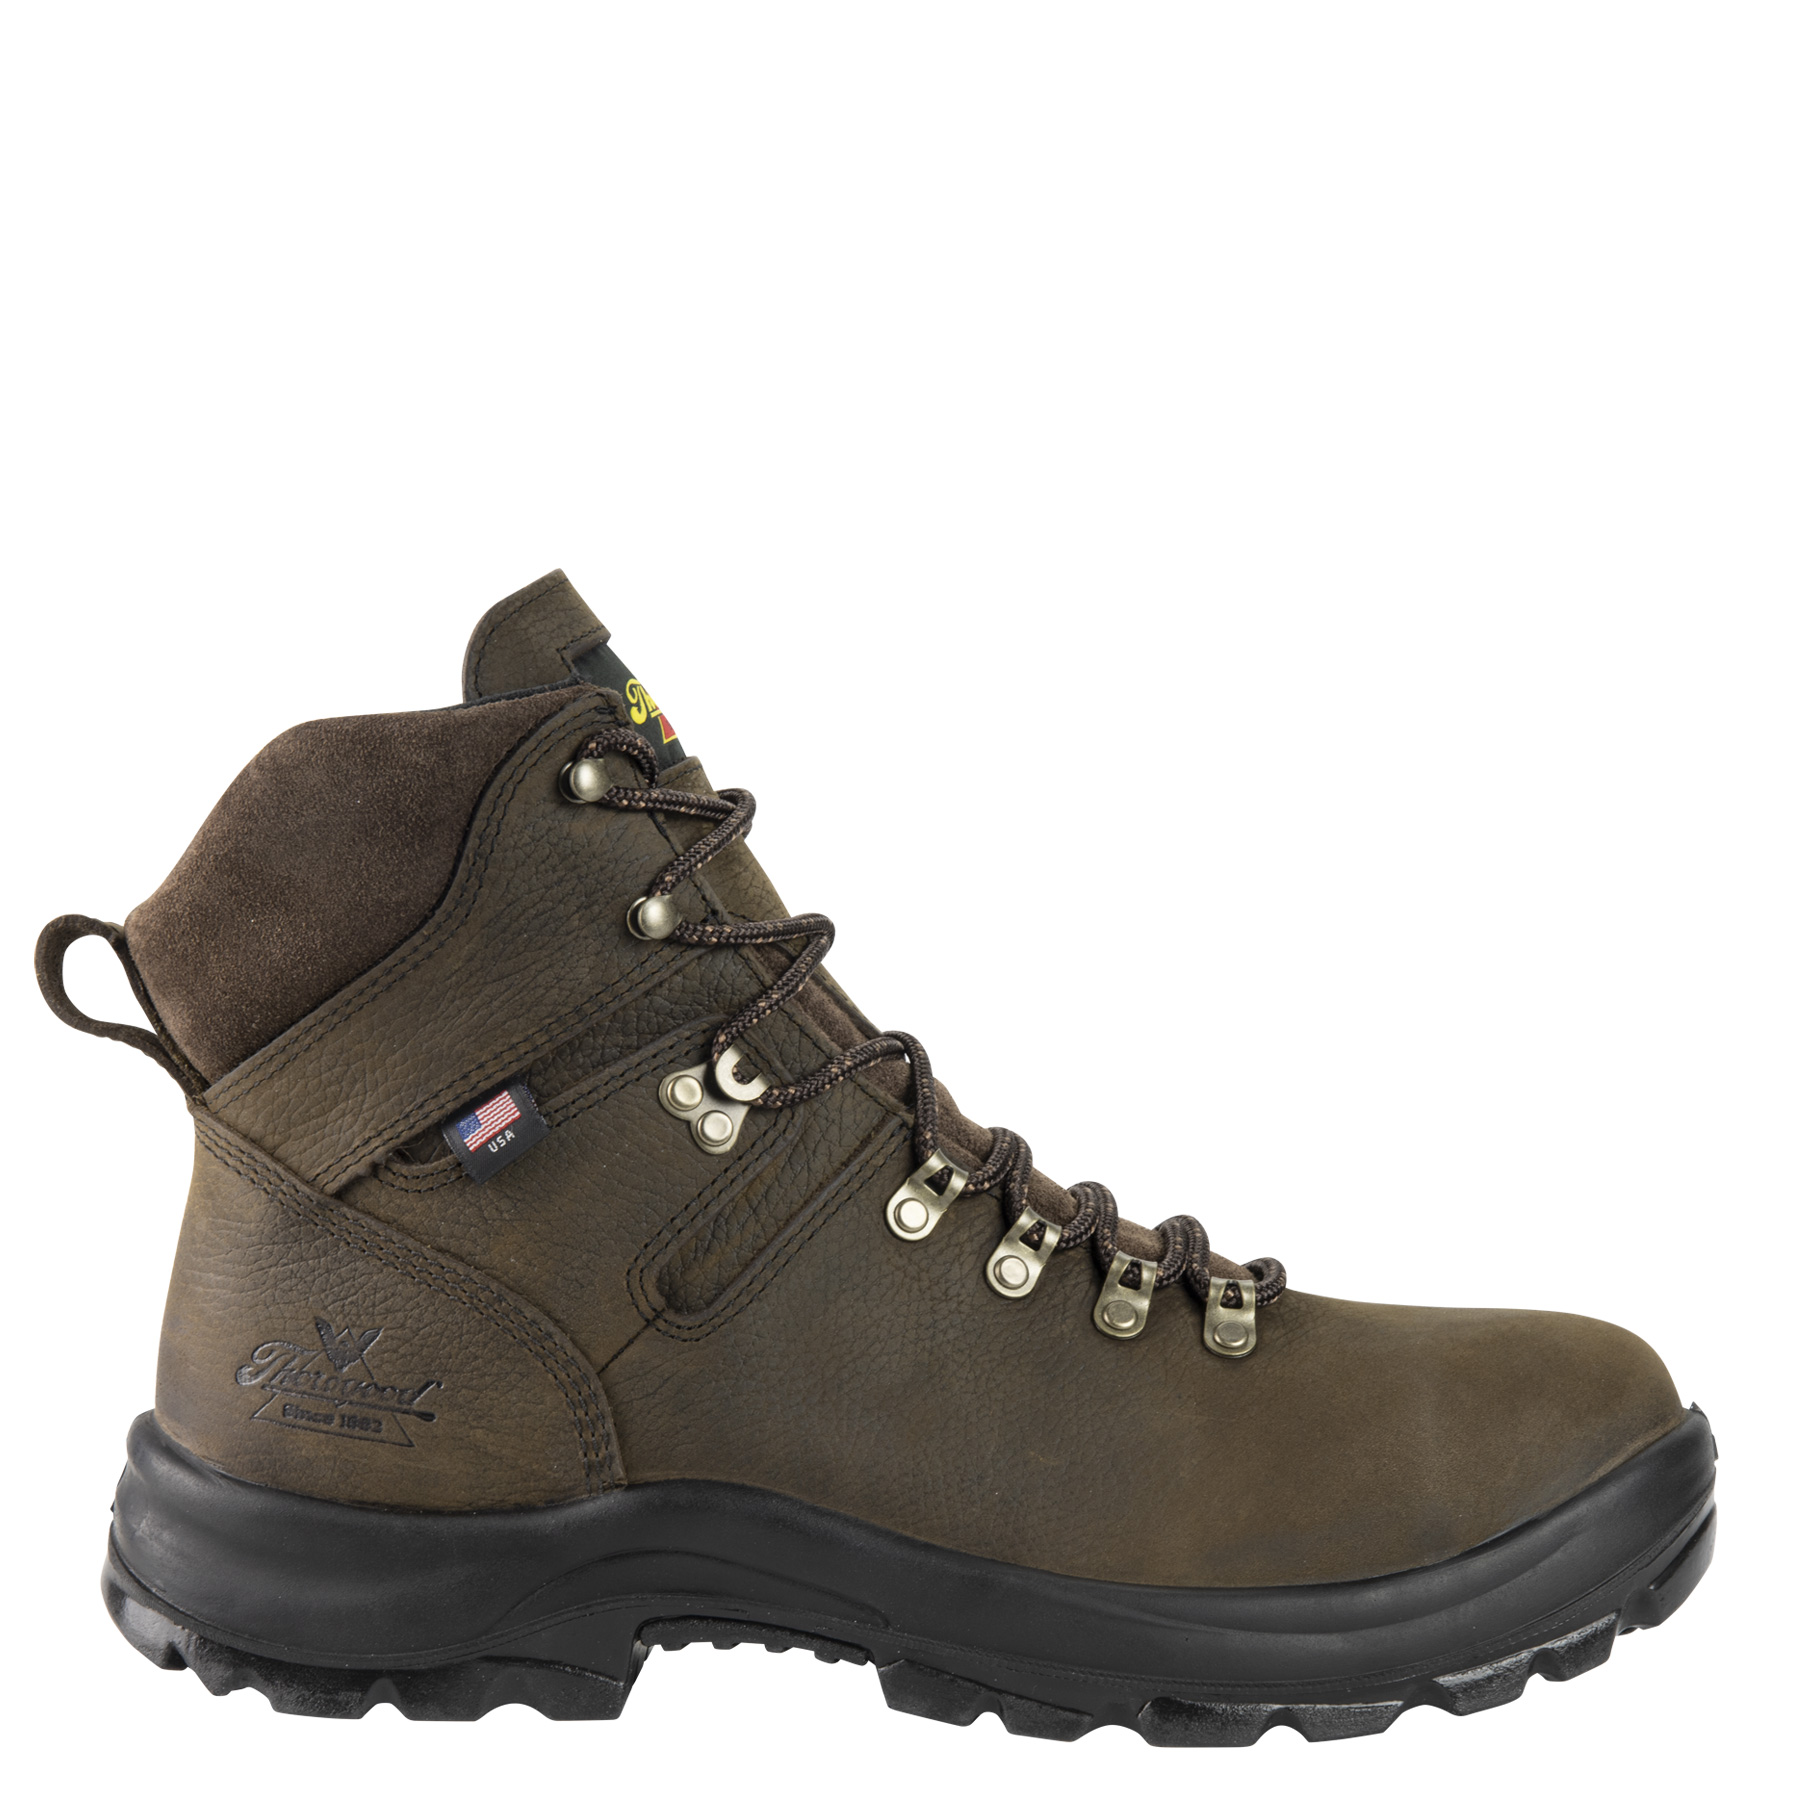 Thorogood American Union Series Waterproof 6 Inch Brown Steel Toe Work Boots from GME Supply